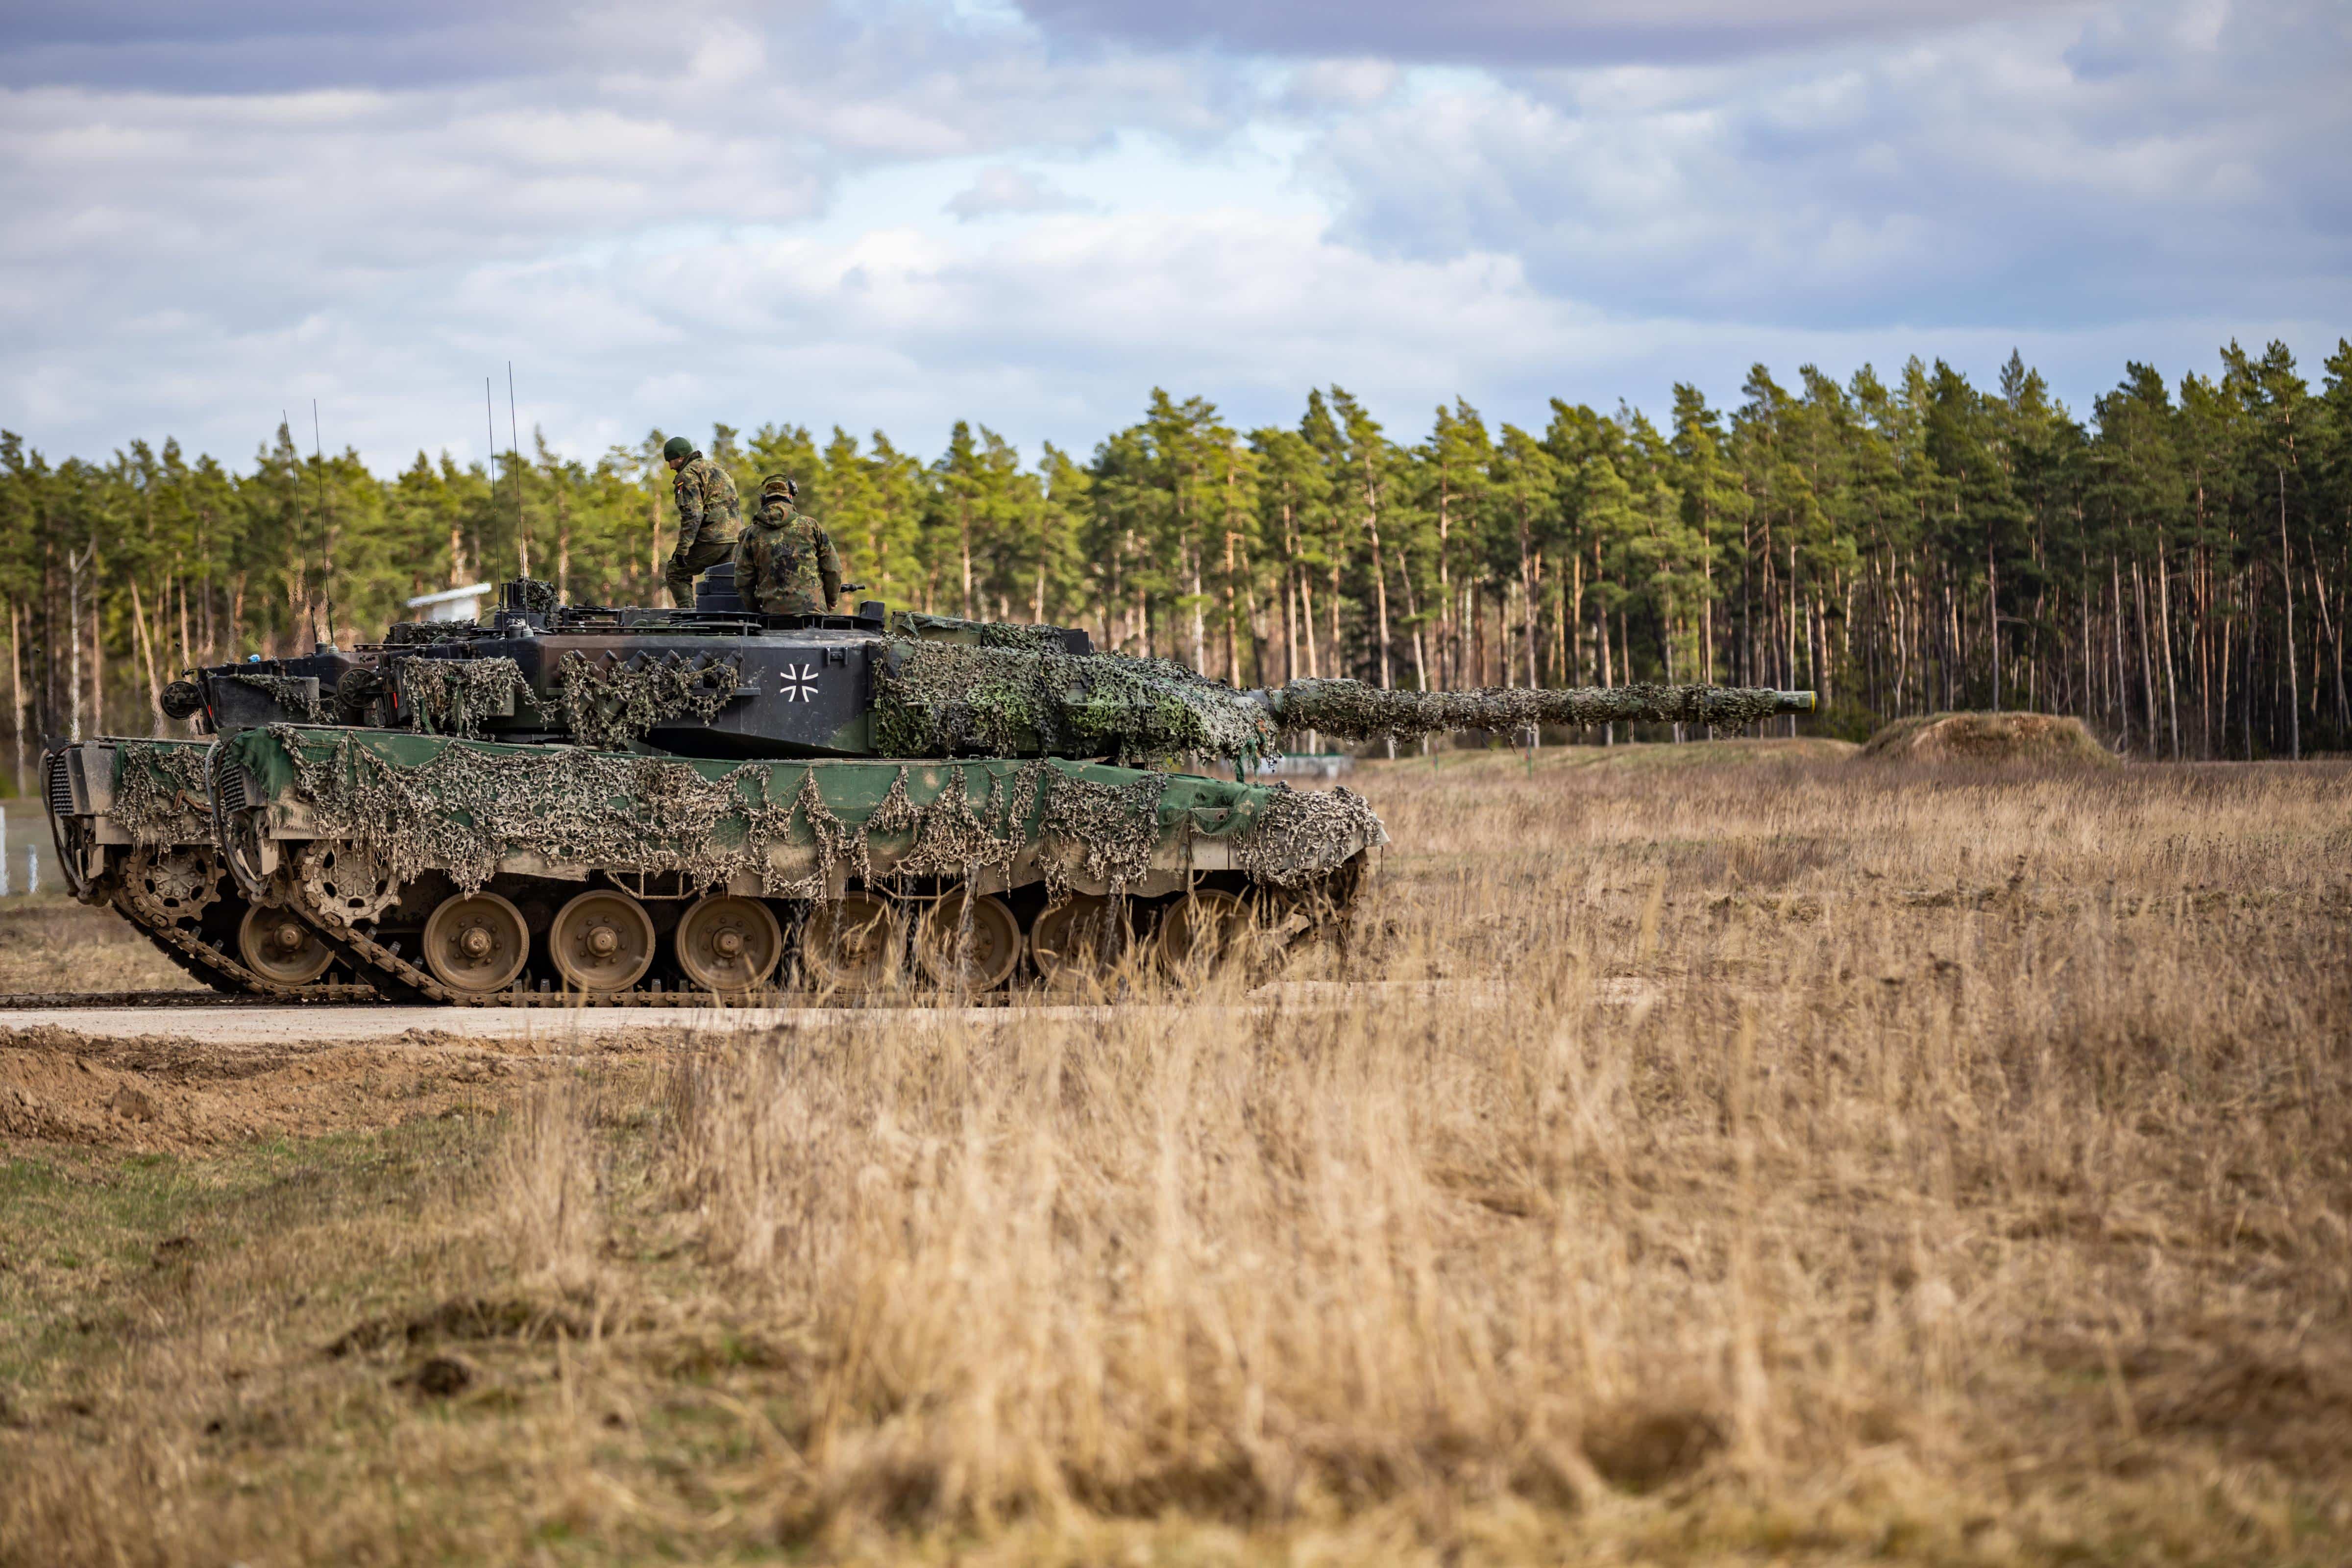 German soldiers assigned to the 93 Armored Demonstration Battalion, 9th Panzerlehr Brigade, 1st Panzer Division, maneuver a Leopard 2A6 tank onto the range during a combined arms live fire exercise in Bemowo Piskie, Poland, April 3, 2023. The 4th Infantry Division’s mission in Europe is to engage in multinational training and exercises across the continent, working alongside NATO allies and regional security partners to provide combat-credible forces to V Corps, America’s forward deployed corps in Europe. (U.S. Army National Guard photo by Sgt. John Schoebel)